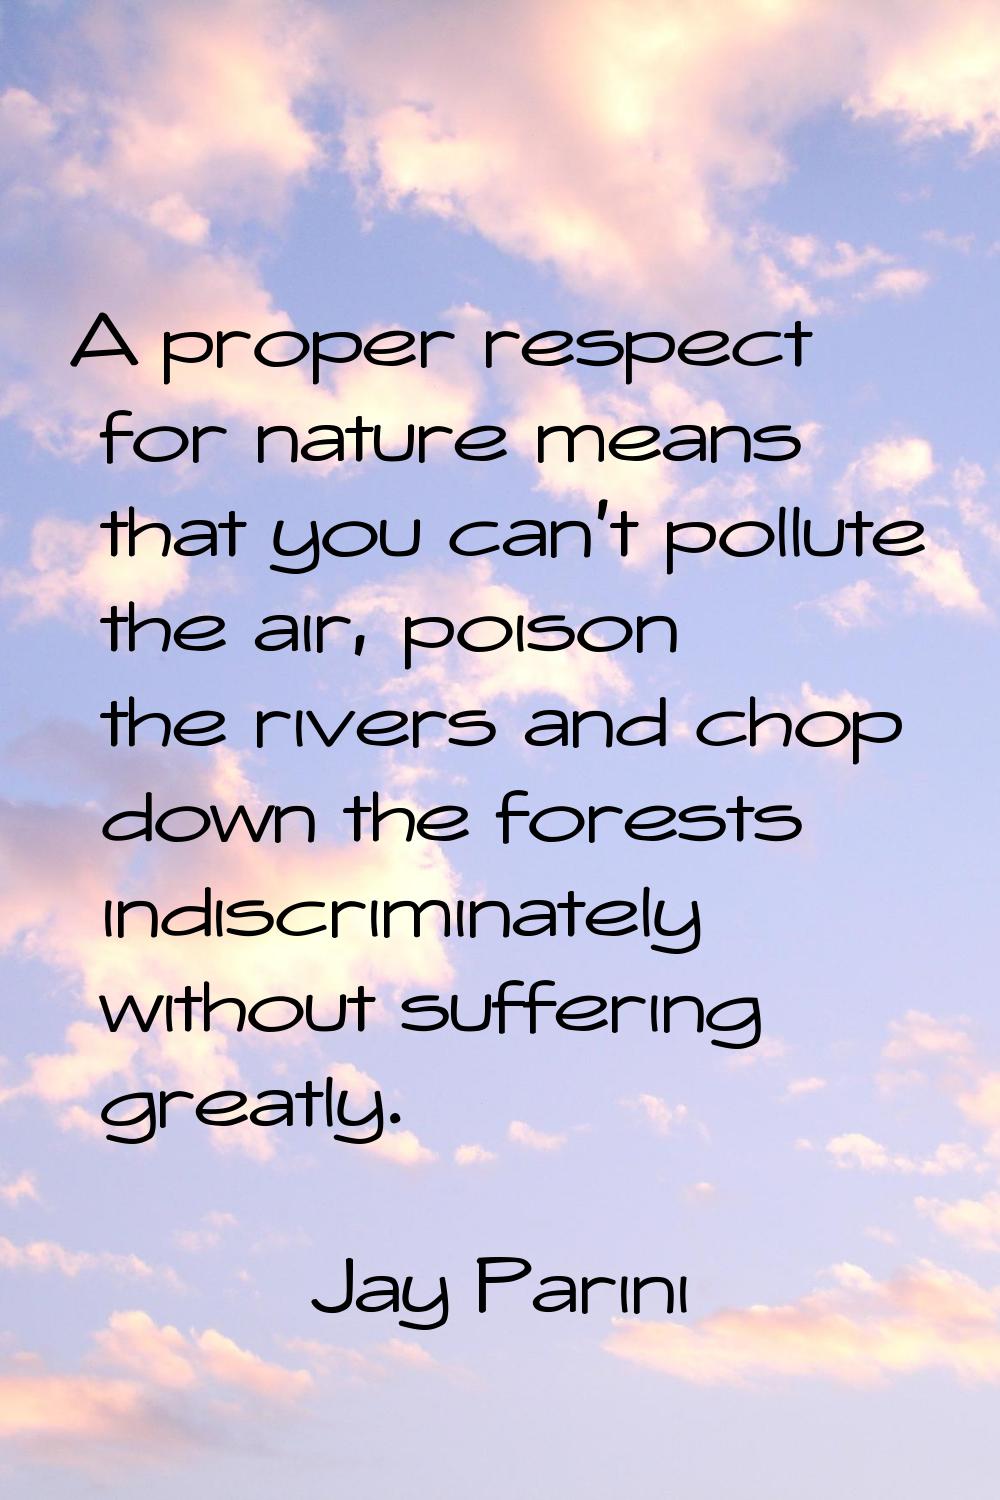 A proper respect for nature means that you can't pollute the air, poison the rivers and chop down t